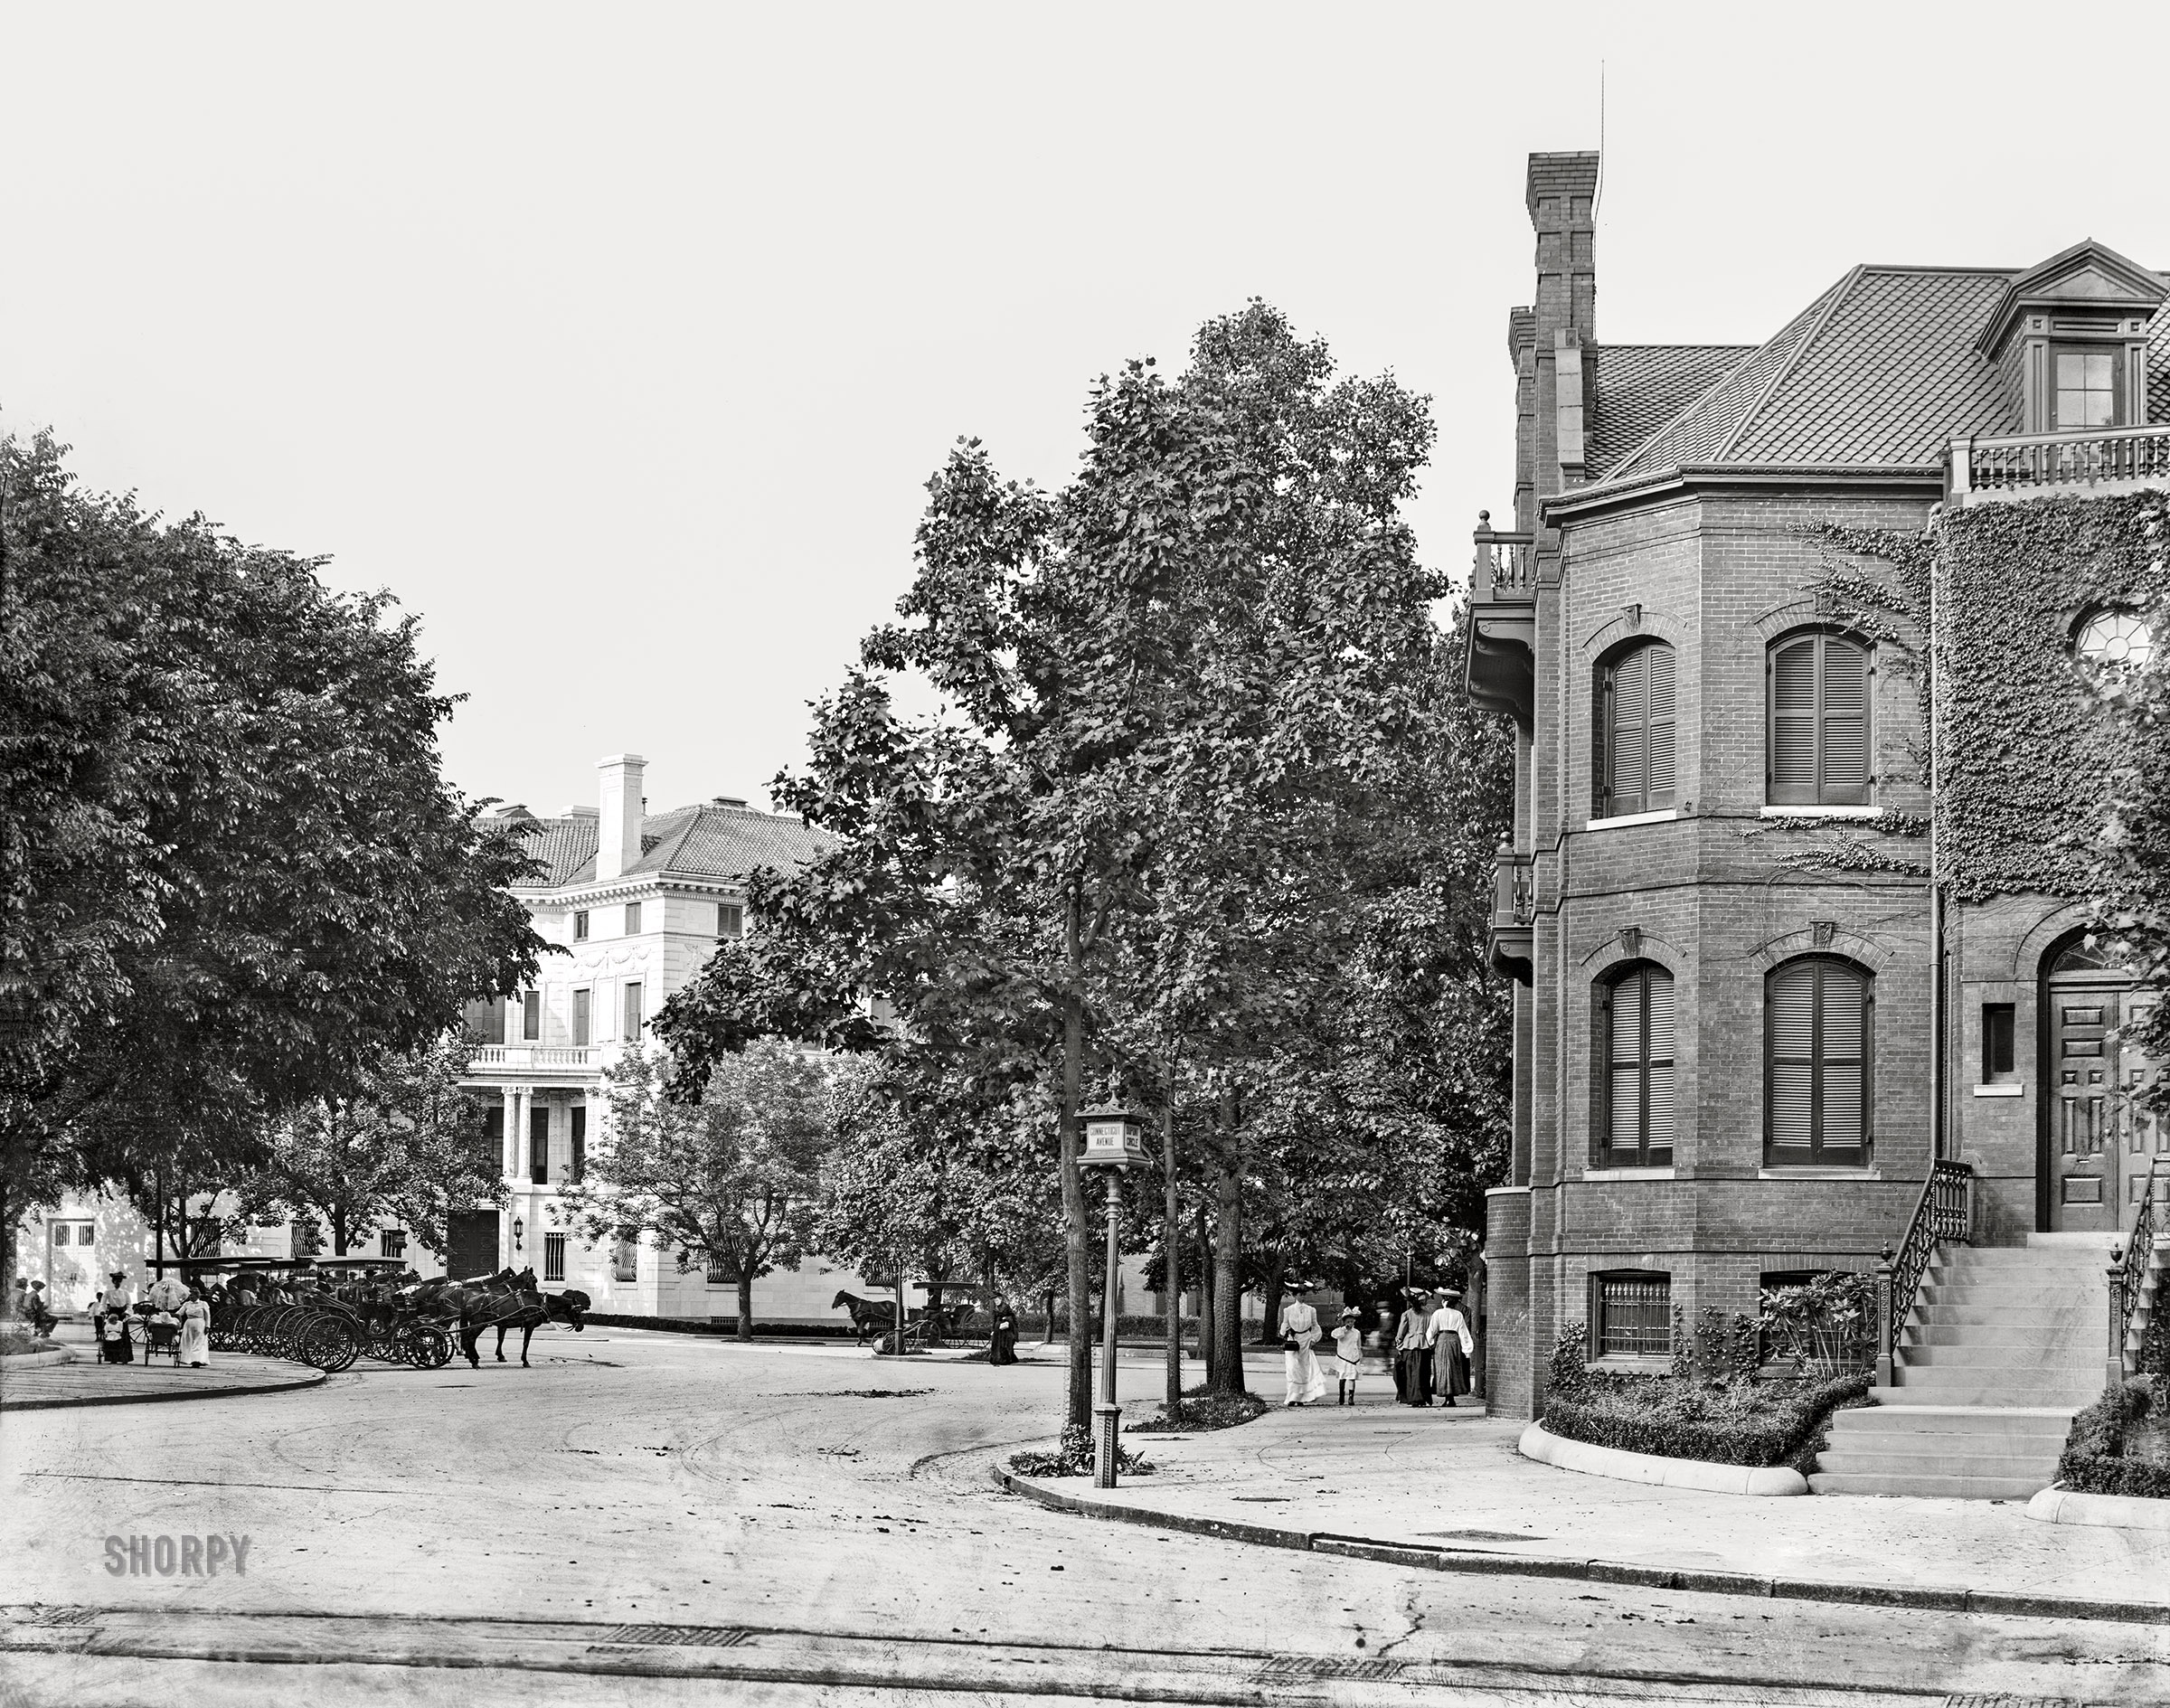 Washington, D.C., circa 1905. "Dupont Circle at Connecticut and Massachusetts Avenues N.W. White building at left is Patterson House, 15 Dupont Circle." Not to mention all those pedestrians. 8x10 inch dry plate glass negative, Detroit Photographic Company. View full size.